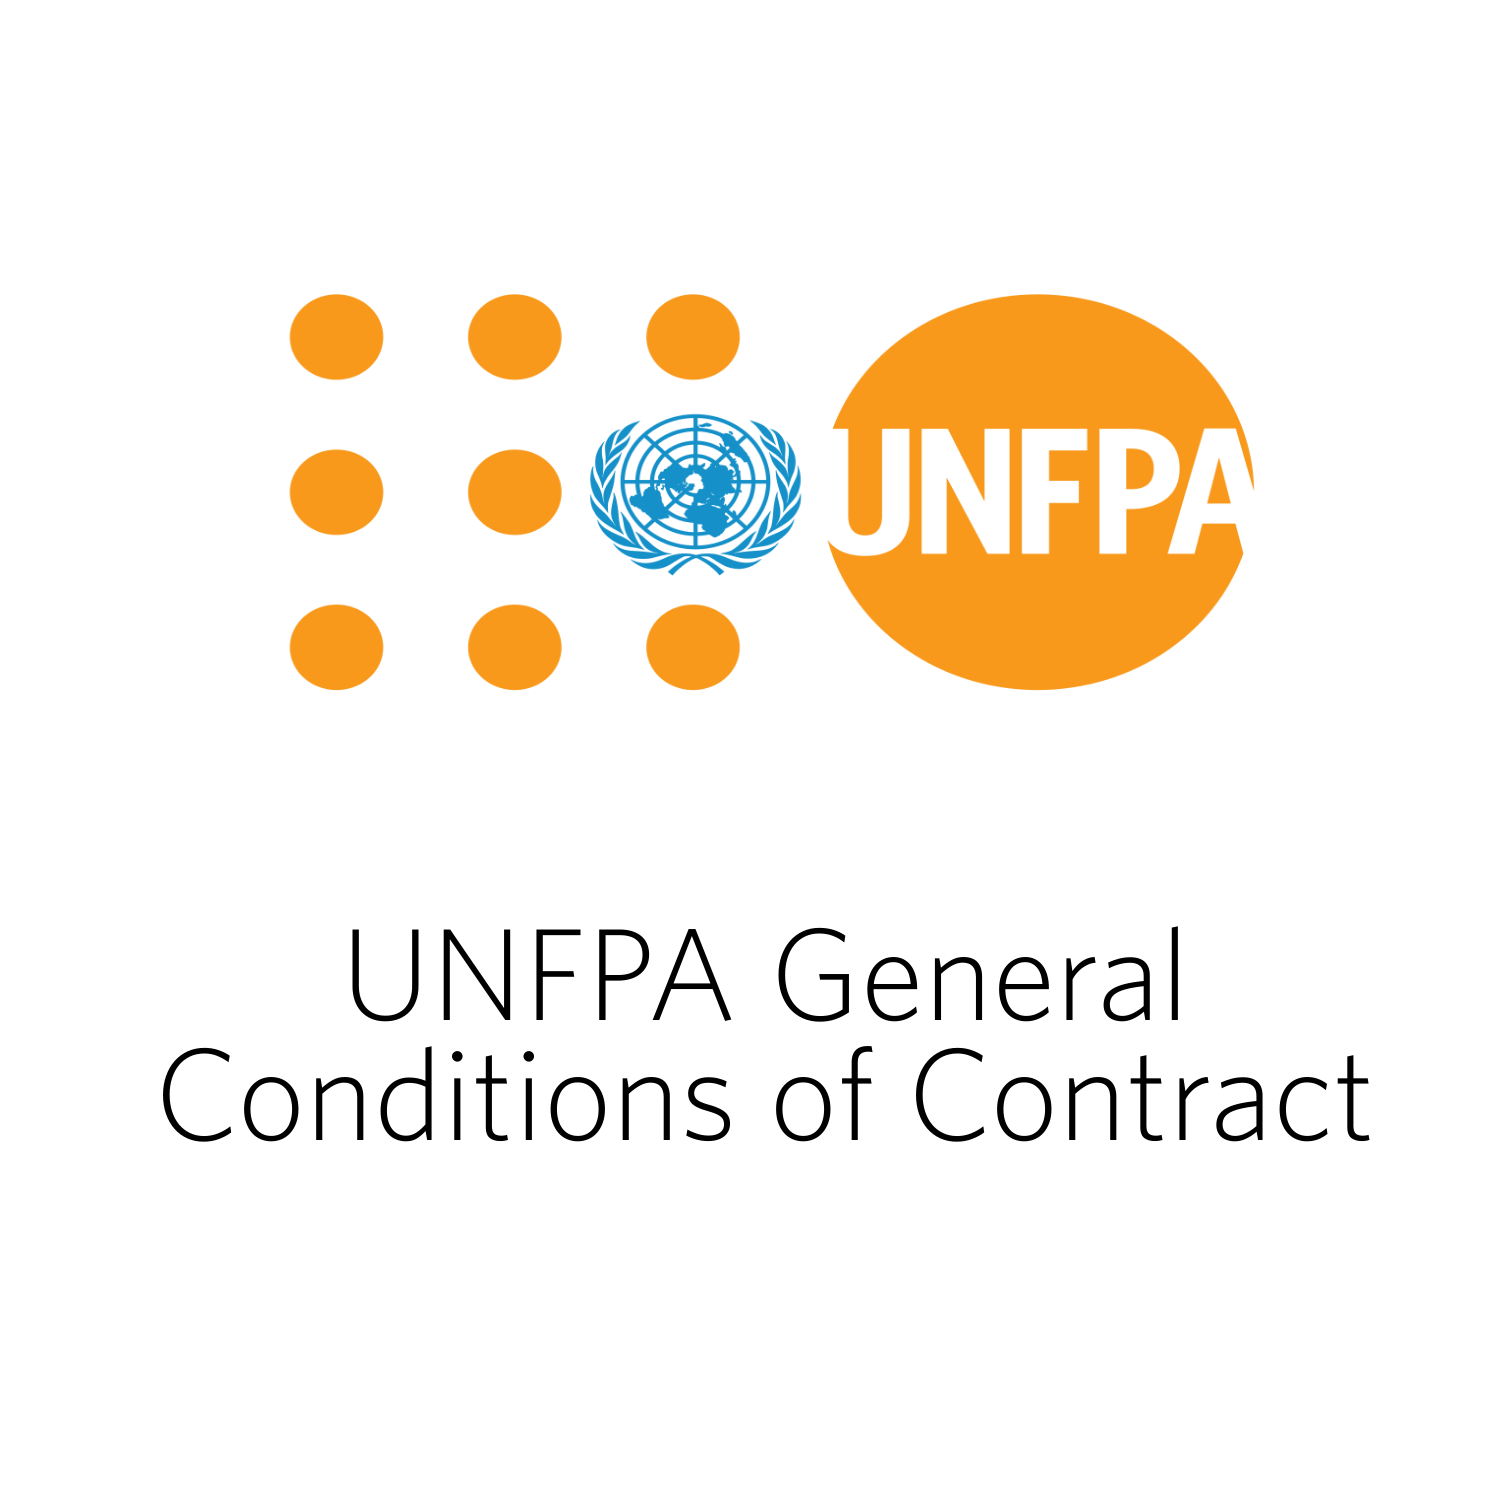 UNFPA General Conditions of Contract